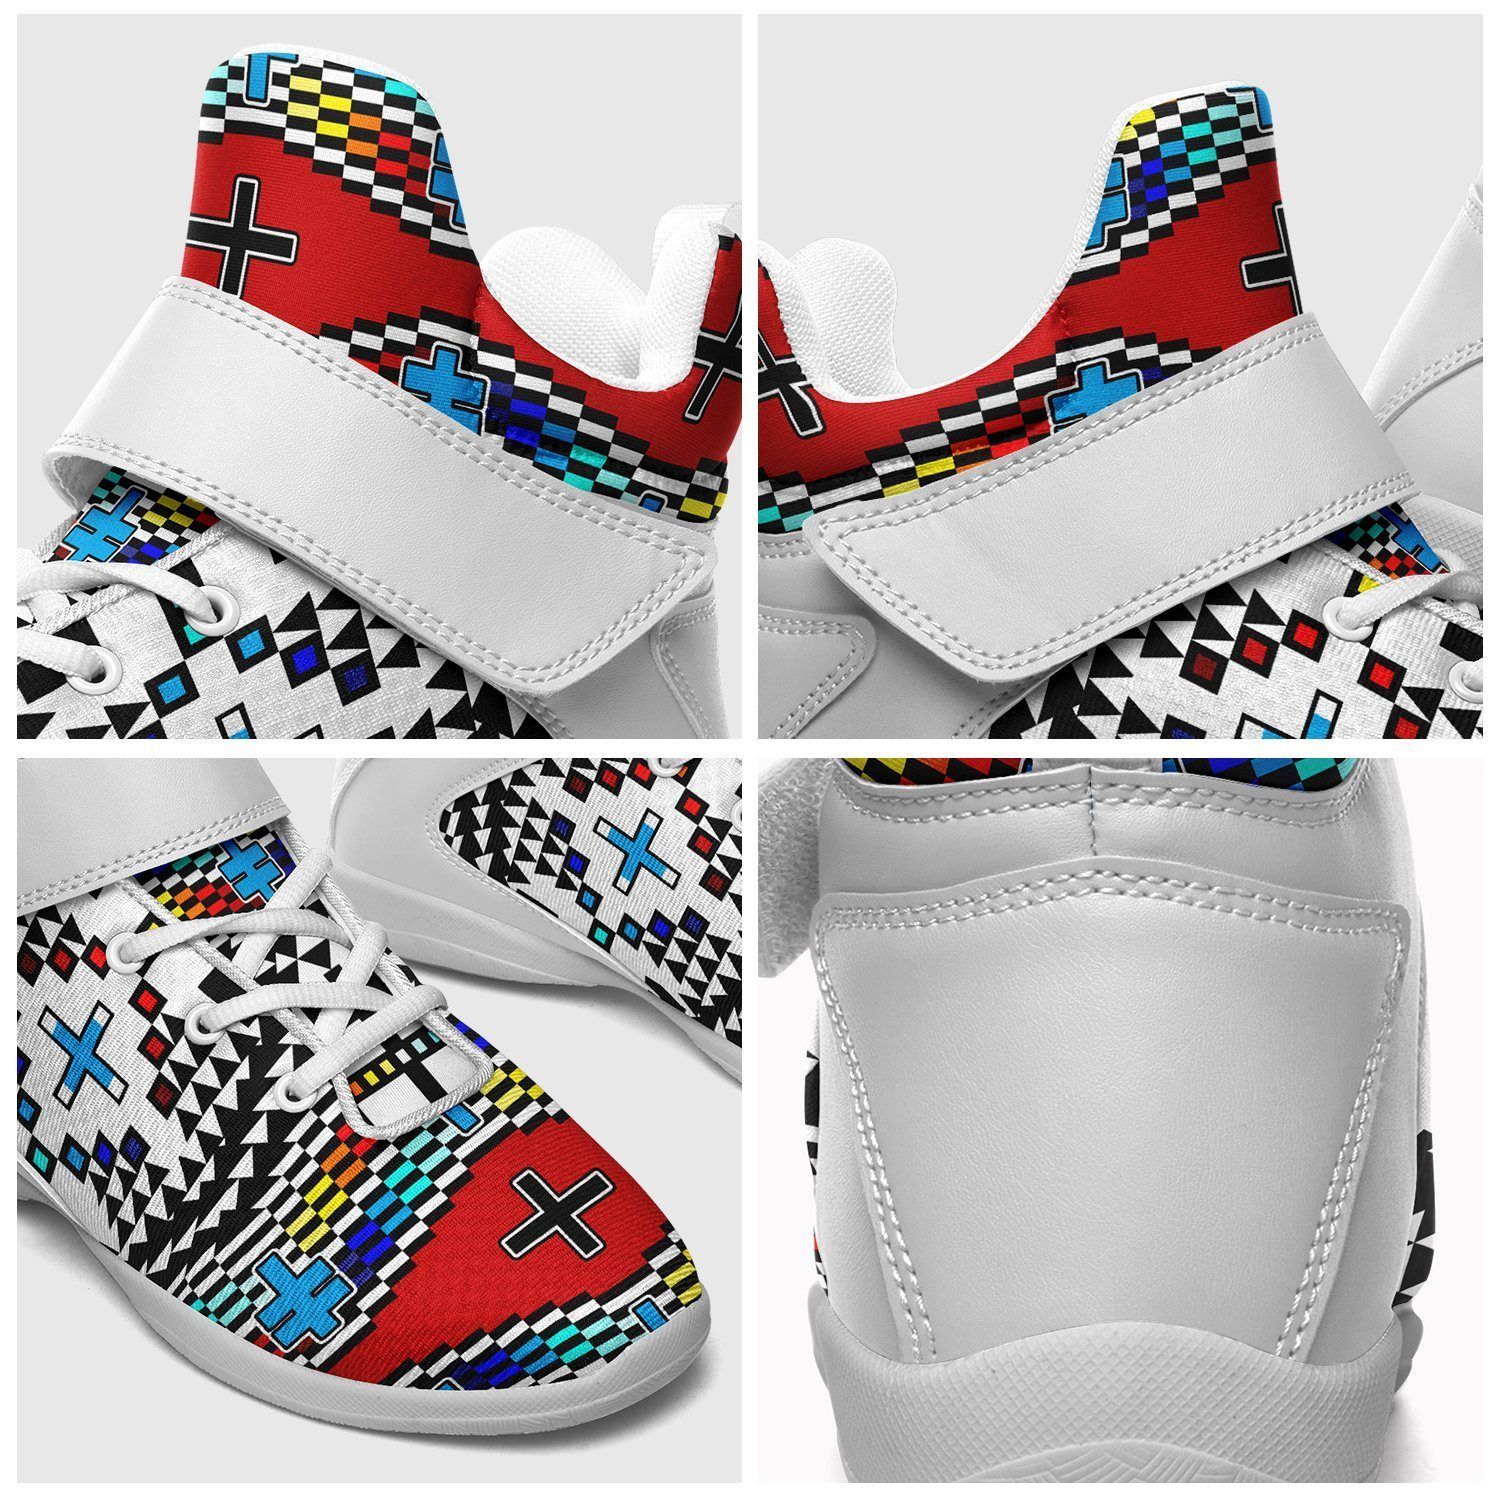 Dragonflies Ipottaa Basketball / Sport High Top Shoes - White Sole 49 Dzine 